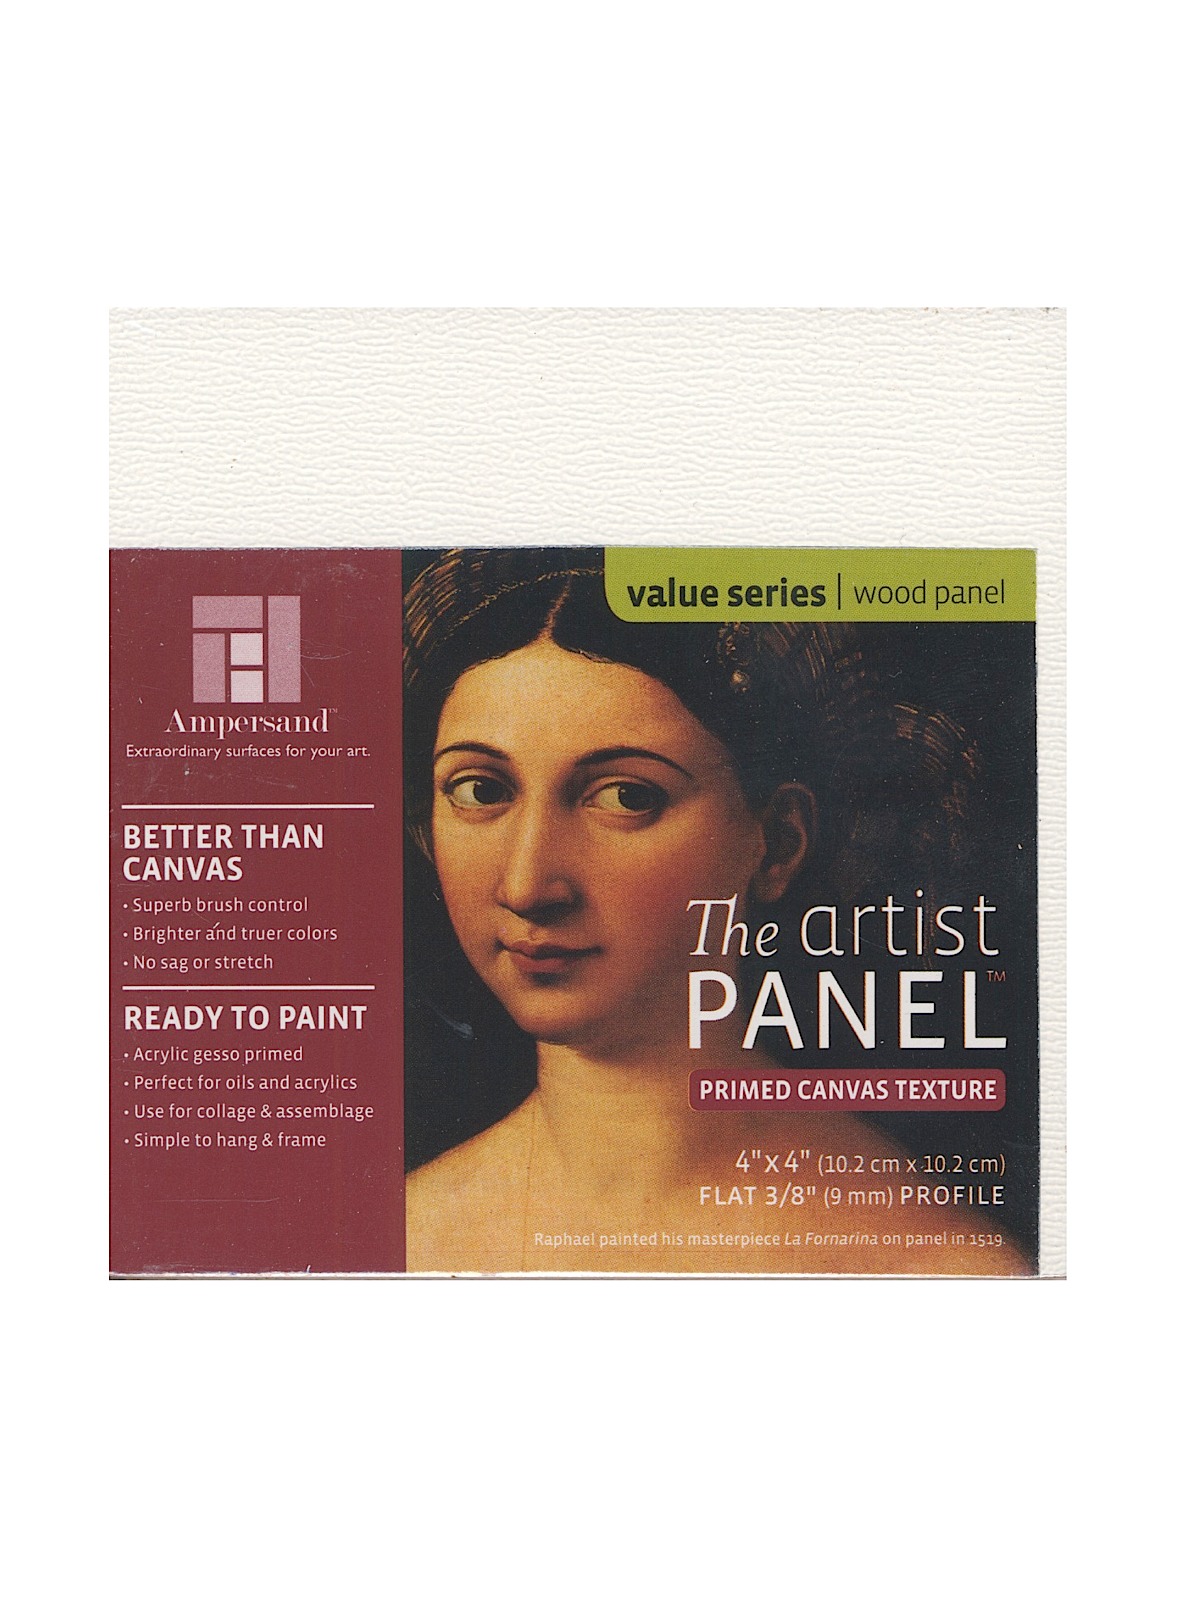 The Artist Panel Canvas Texture Flat Profile 4 In. X 4 In. 3 8 In.